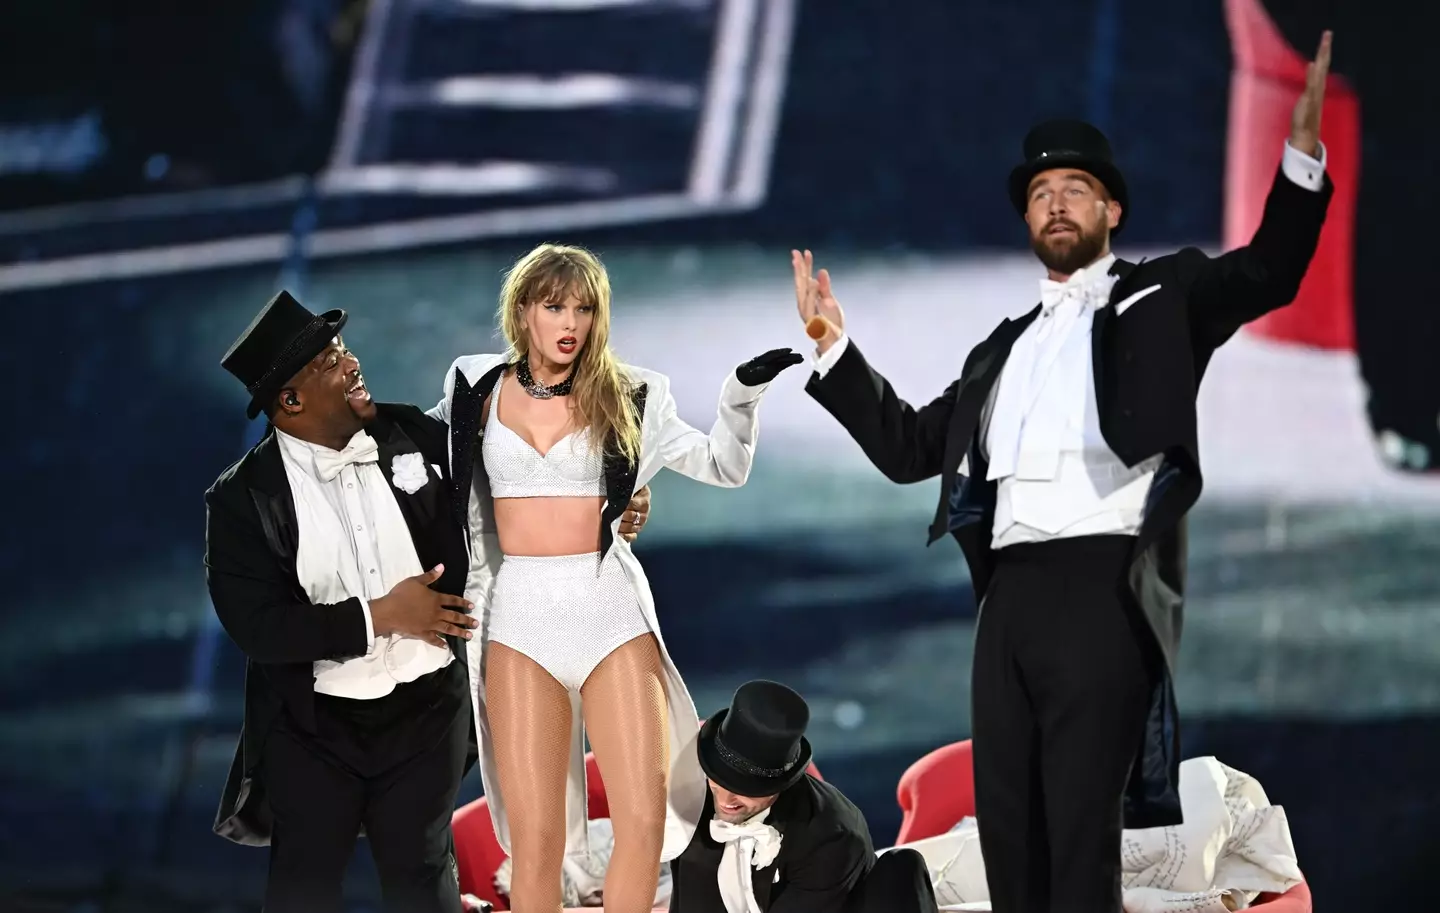 Swifties have been sent into a frenzy. (Gareth Cattermole/TAS24/Getty Images for TAS Rights Management)